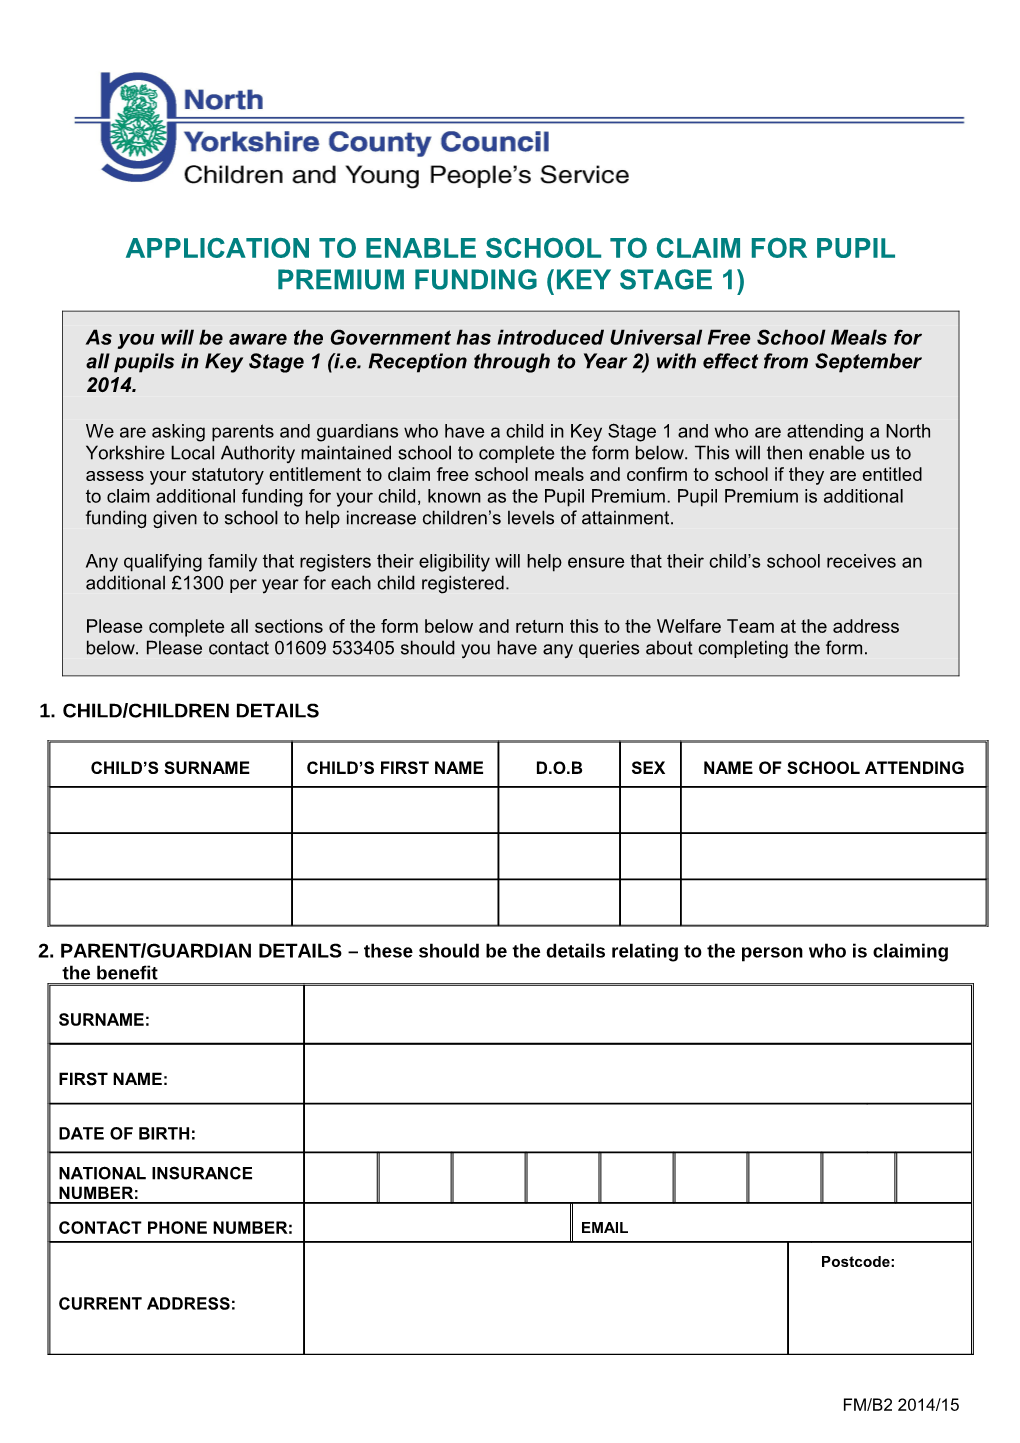 Application for Assistance with Free School Meals and Residential Visits